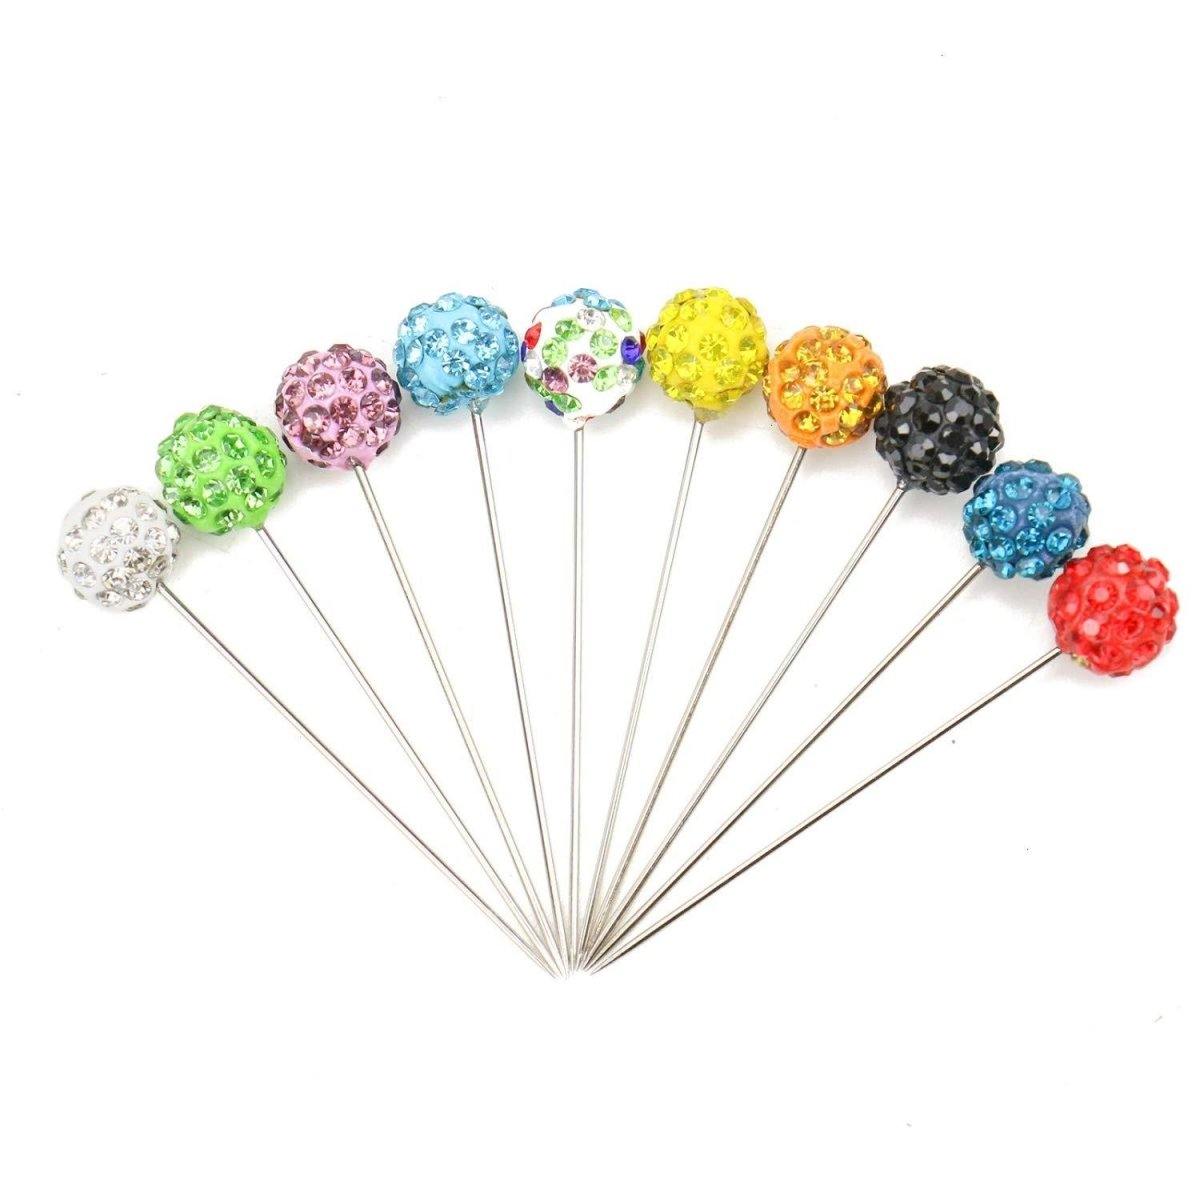 Rhinestone Ball Hijab Pins - Multi Colour 6 pieces - Divinity Collection